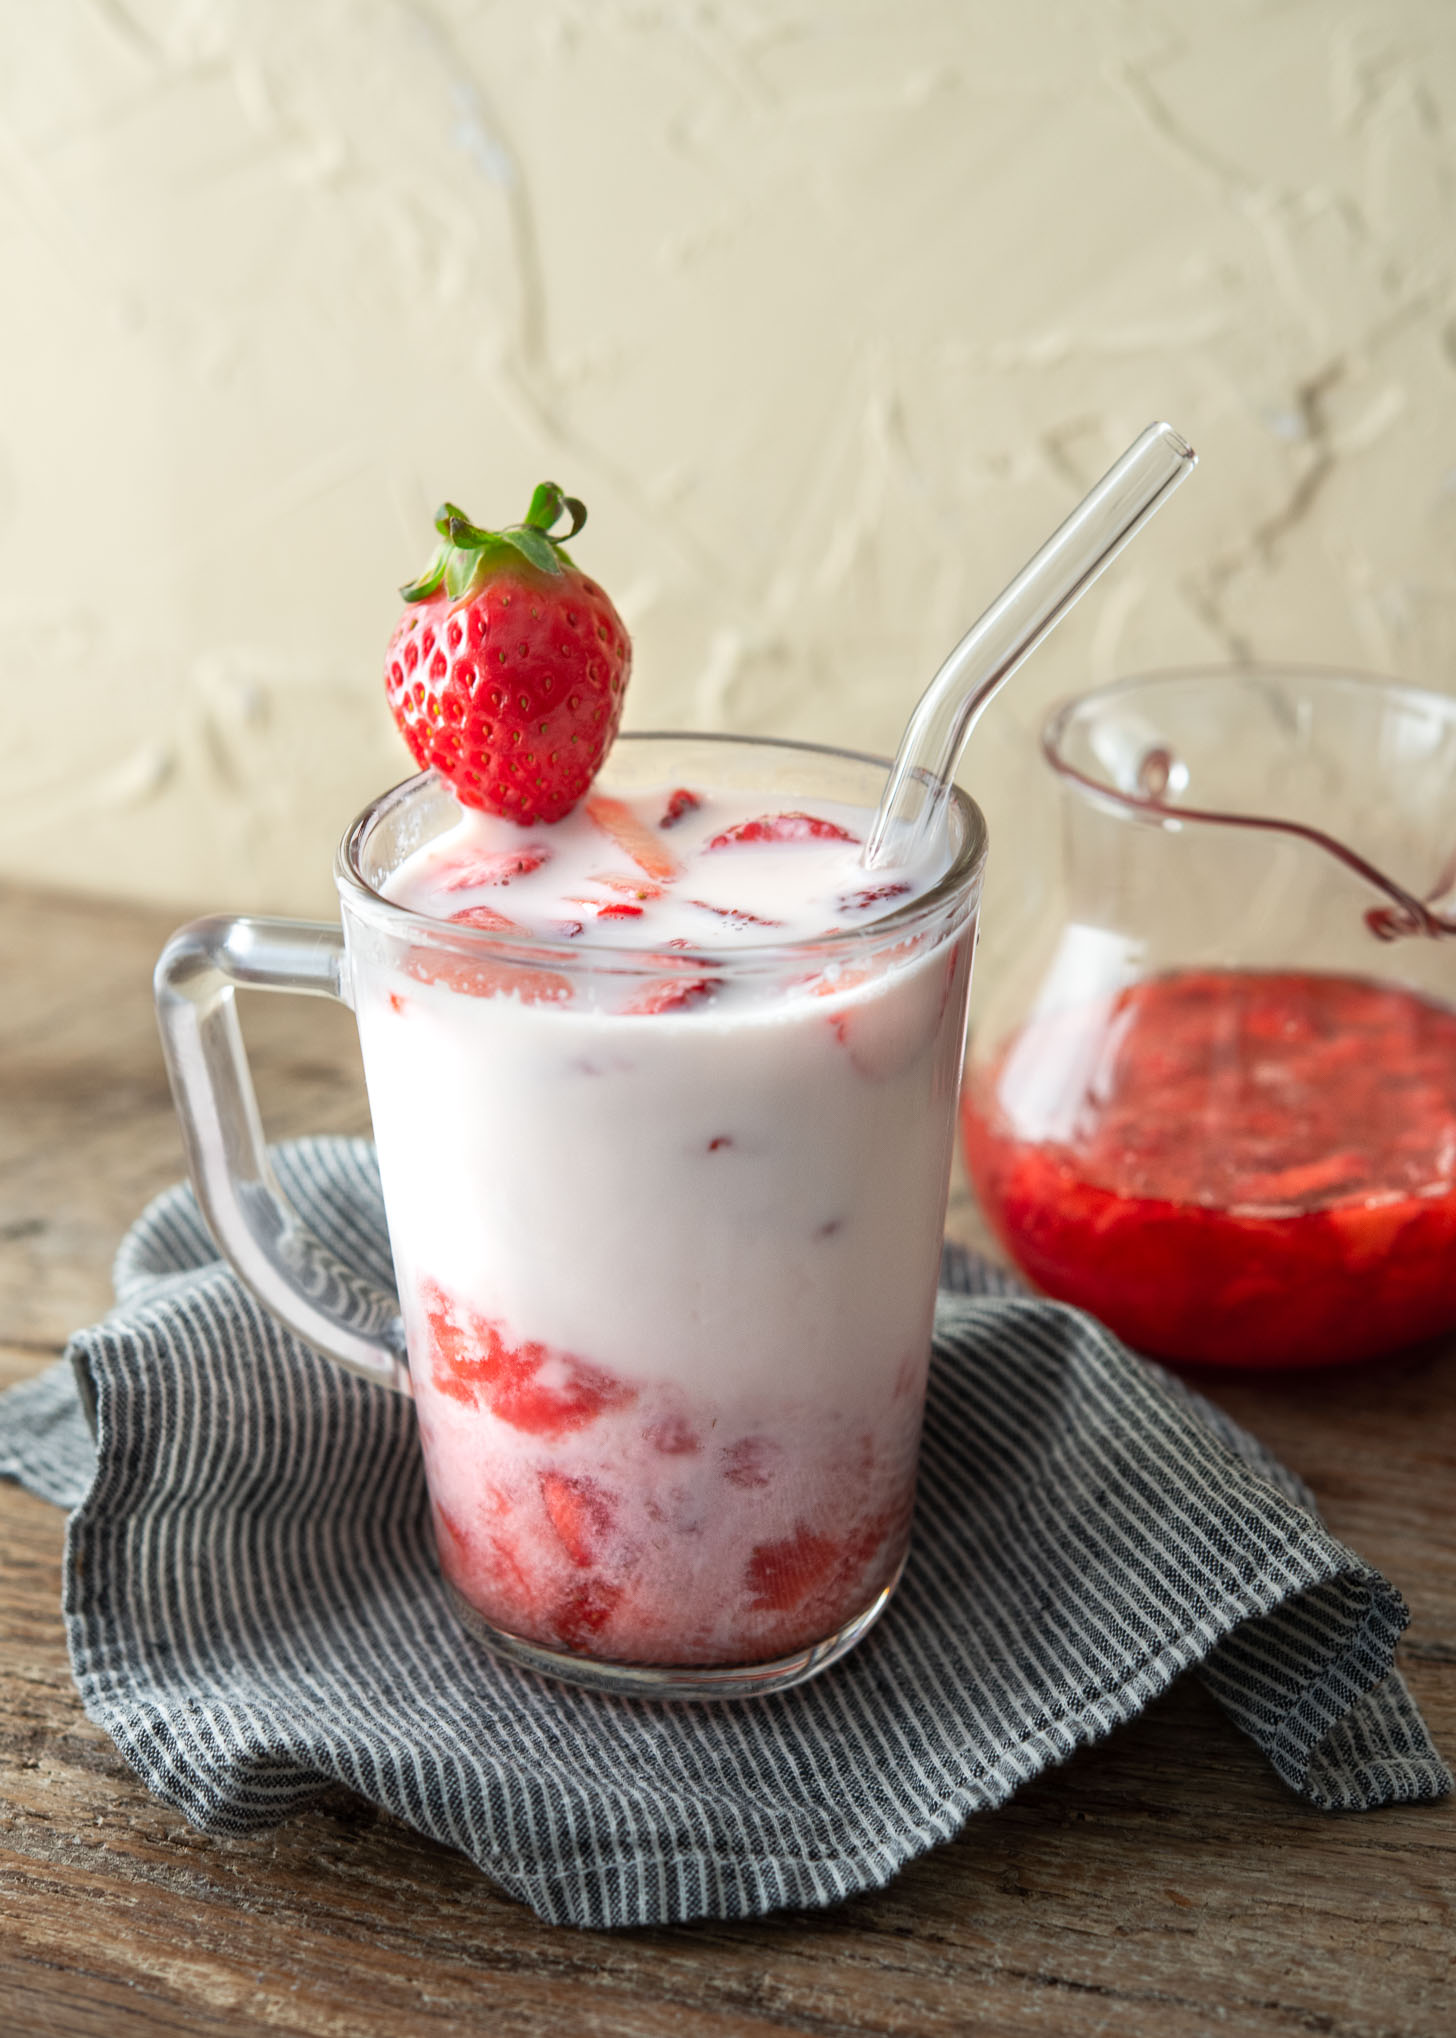 Homemade strawberry syrup marbled with milk in a glass cup garnished with fresh strawberry pieces.